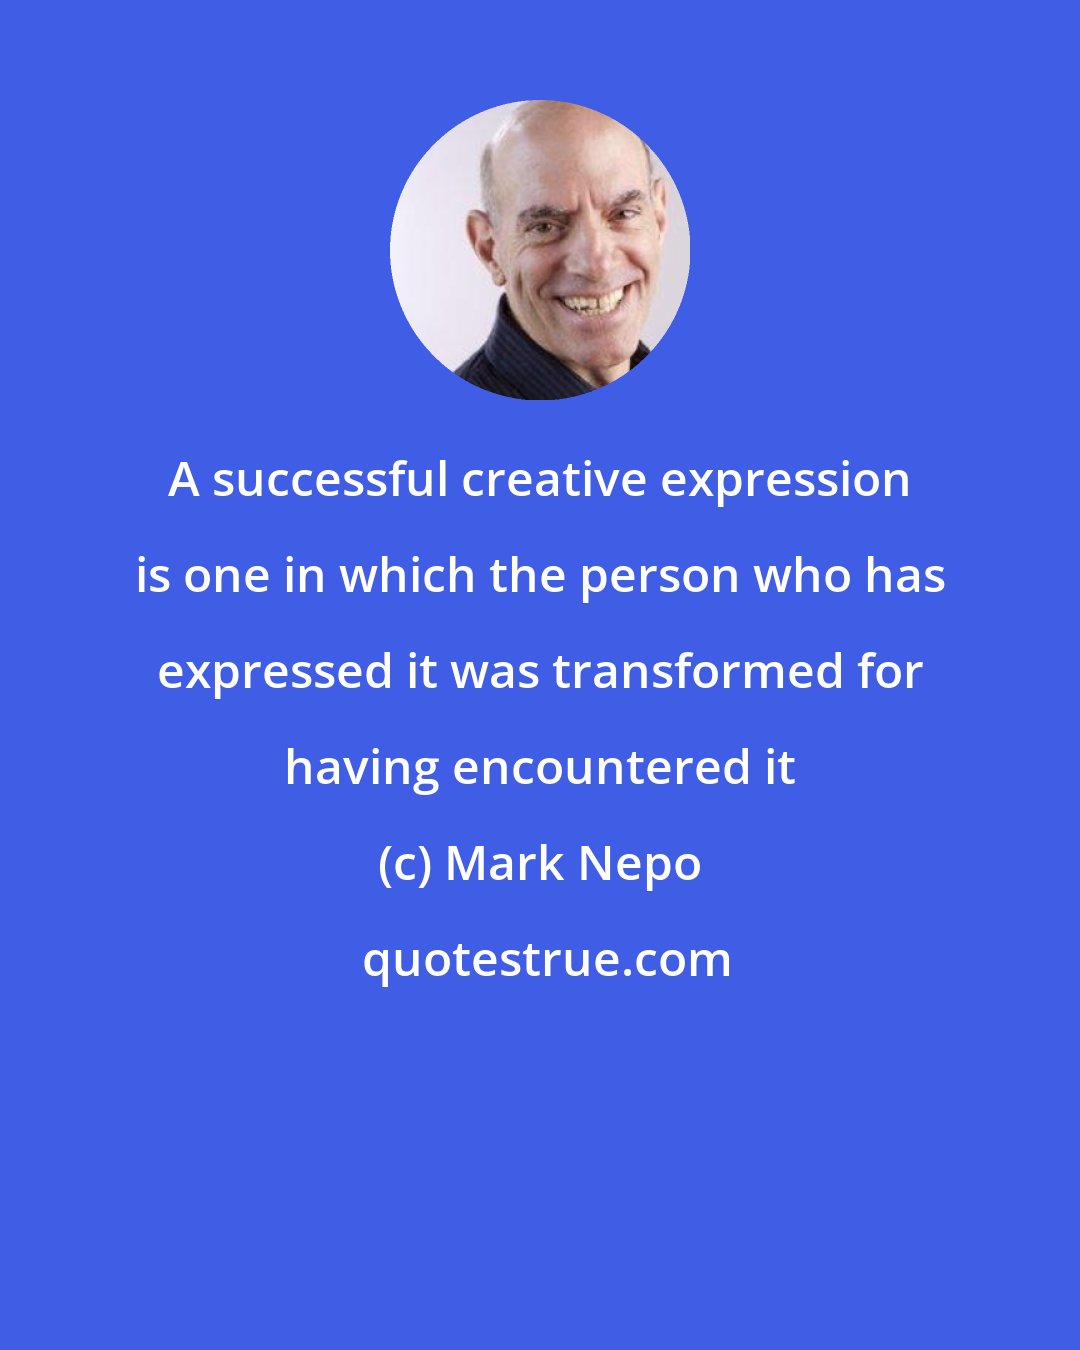 Mark Nepo: A successful creative expression is one in which the person who has expressed it was transformed for having encountered it